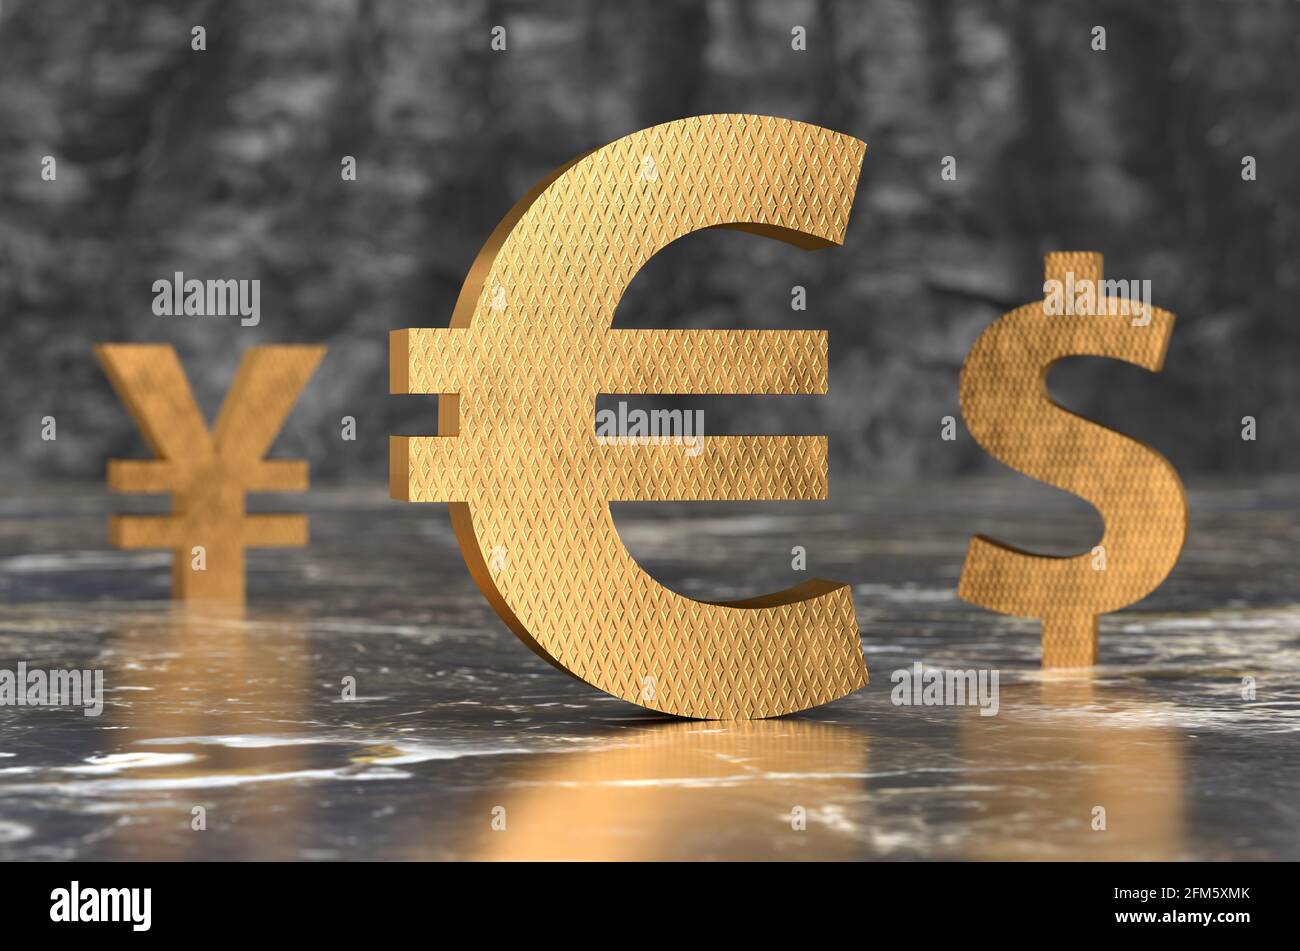 Big golden 3D euro dollar yuan currency symbols on shiny marble floor 3D rendering Stock Photo